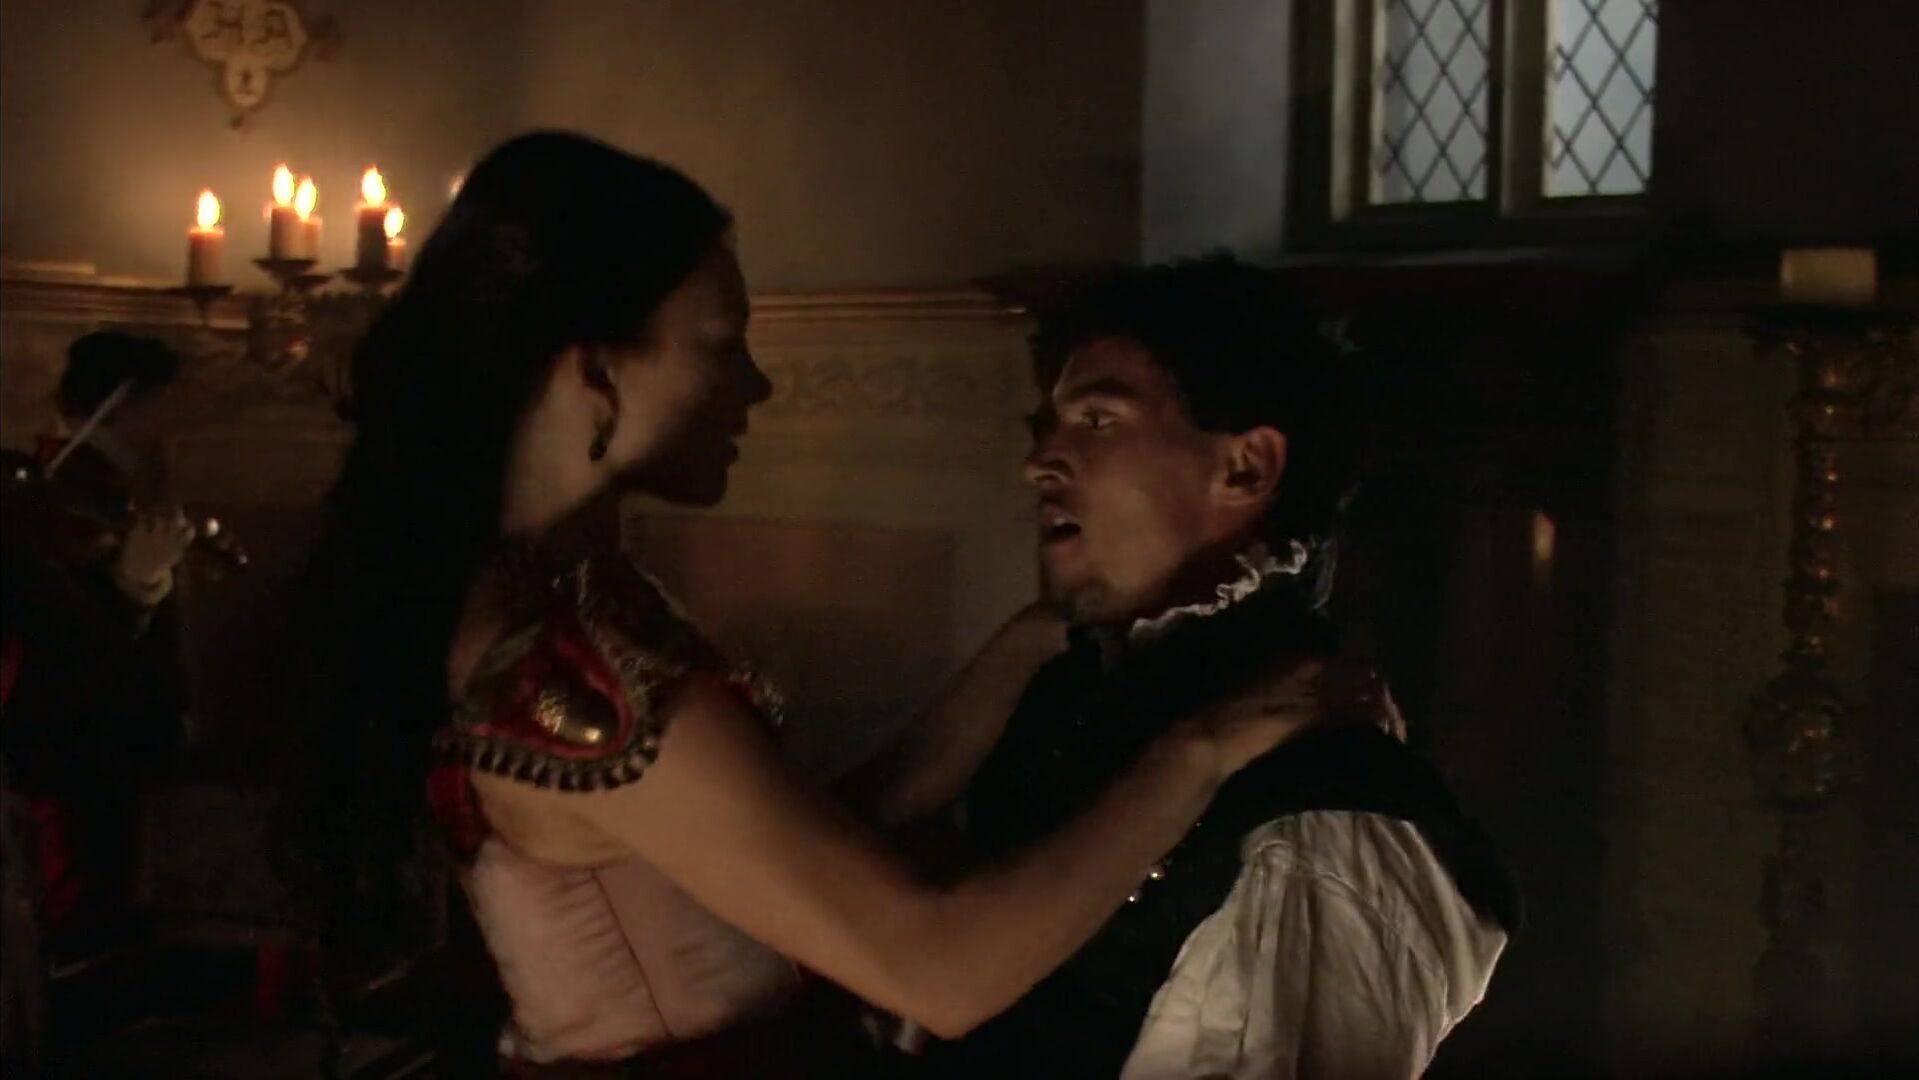 Cbt TV series The Tudors with participation of popular actress Natalie Dormer being fucked Buttplug - 2